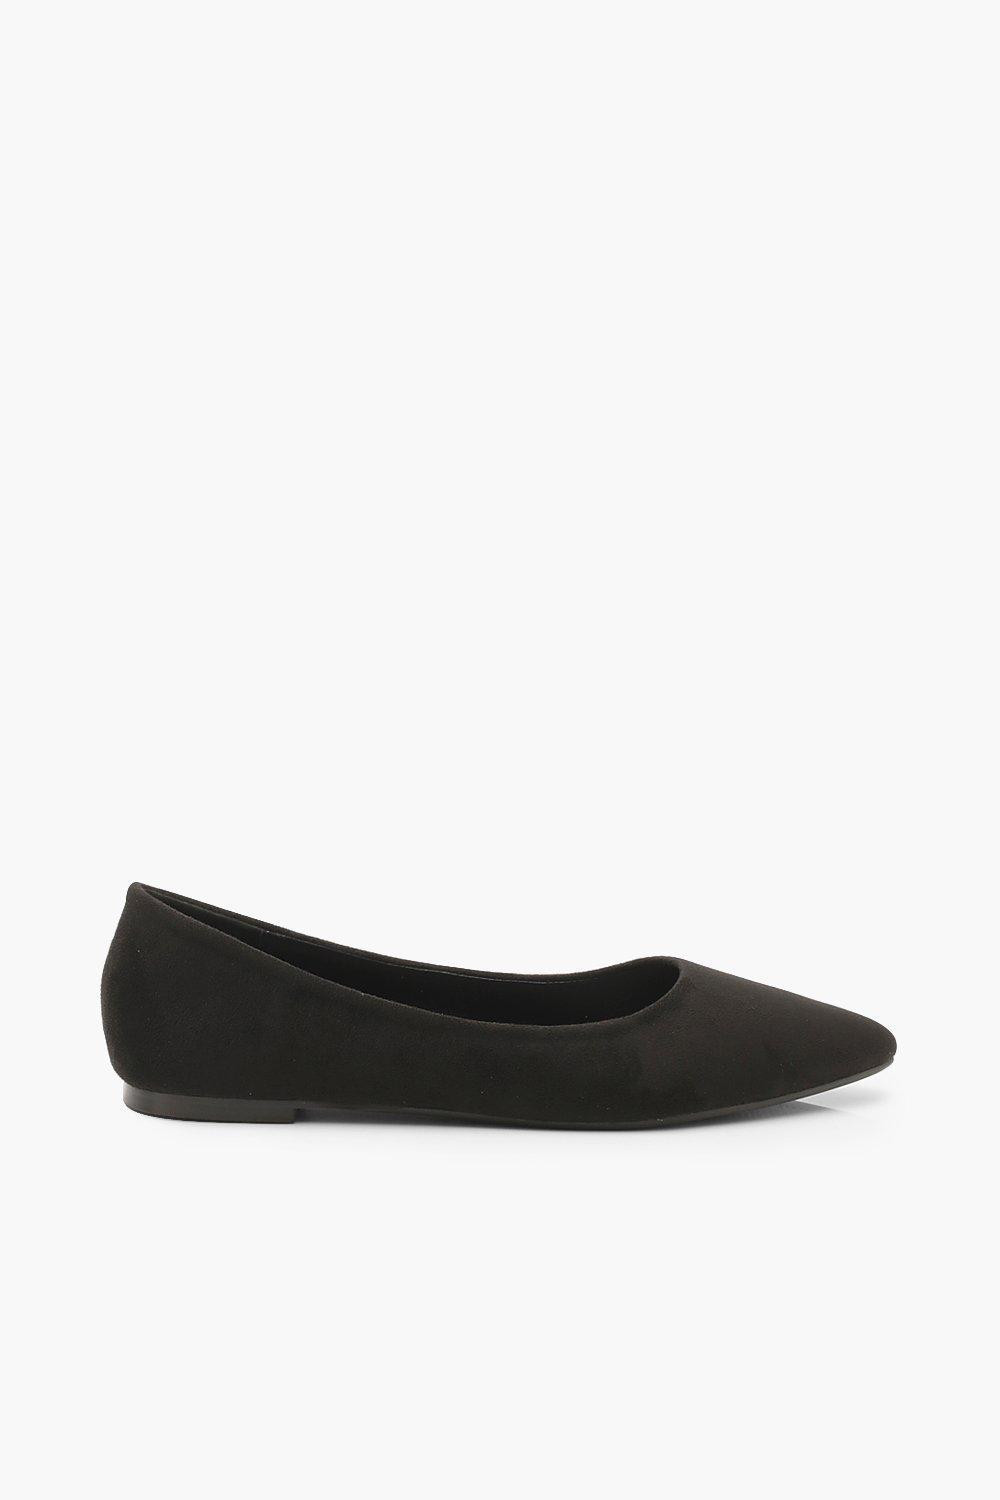 Boohoo Basic Pointed Flats in Black - Lyst